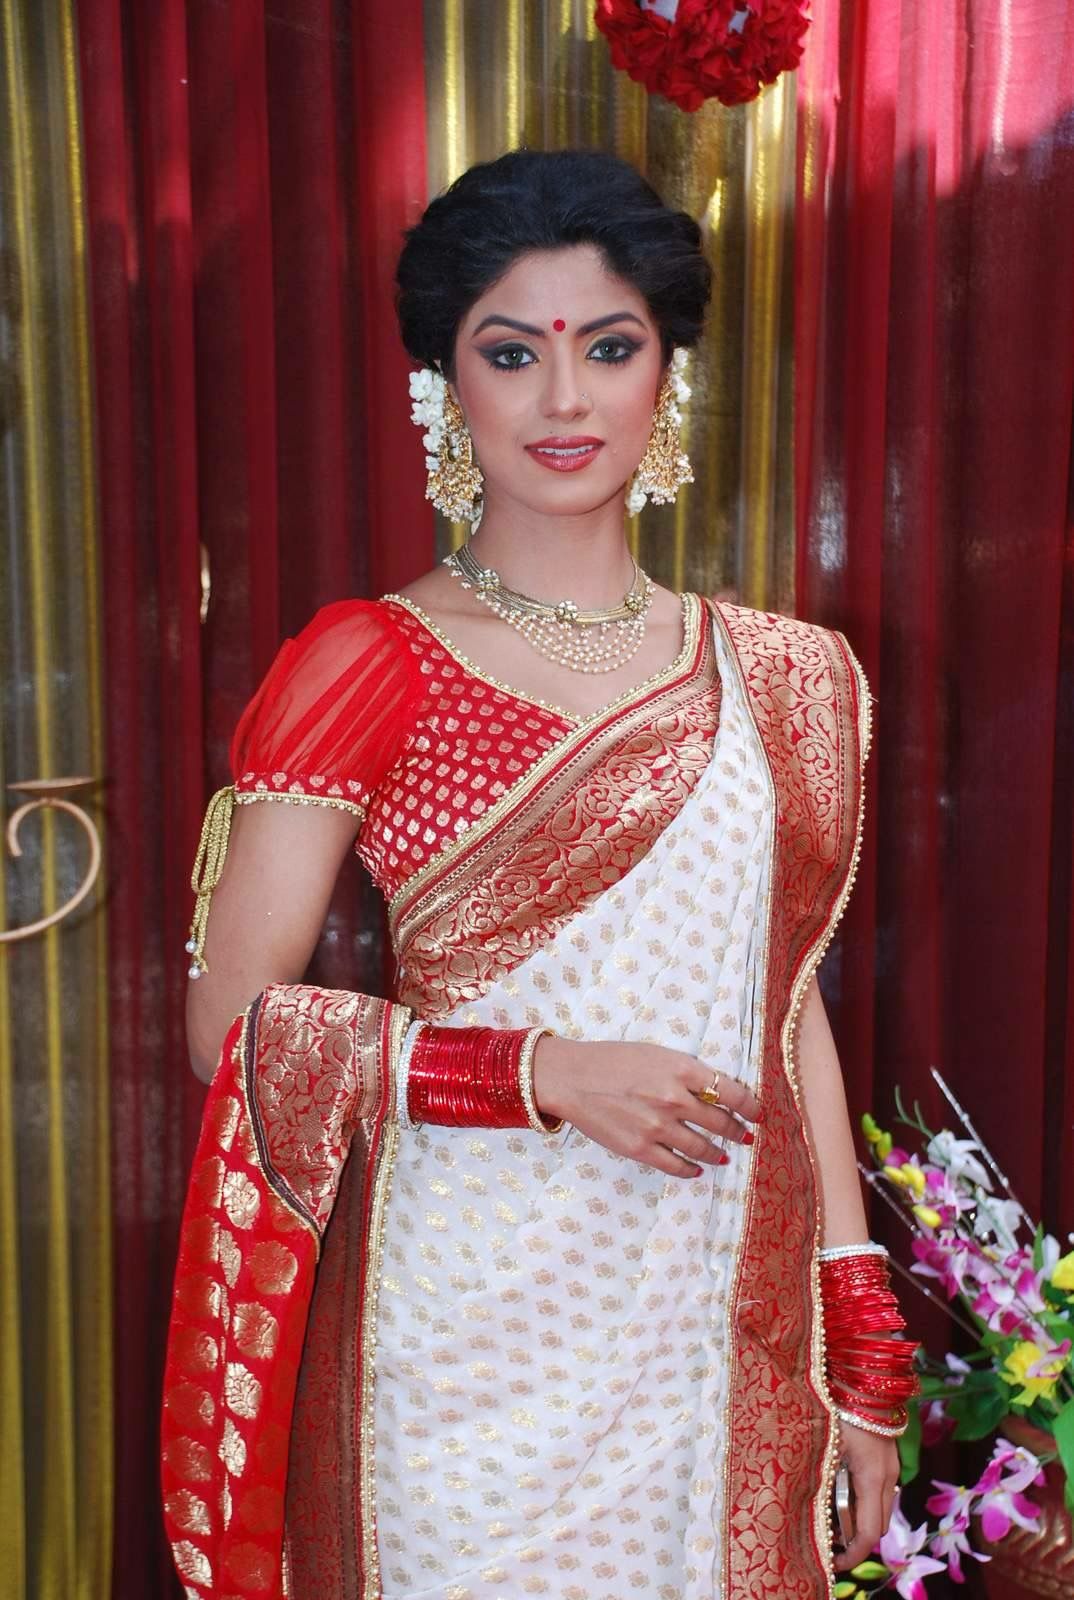 How to Wear Bengali Saree Step by Step Learn from Images Bengali Sarees Buy Online Bengali Silk Saree How to Wear Bengali Saree Bengali Style Saree Draping